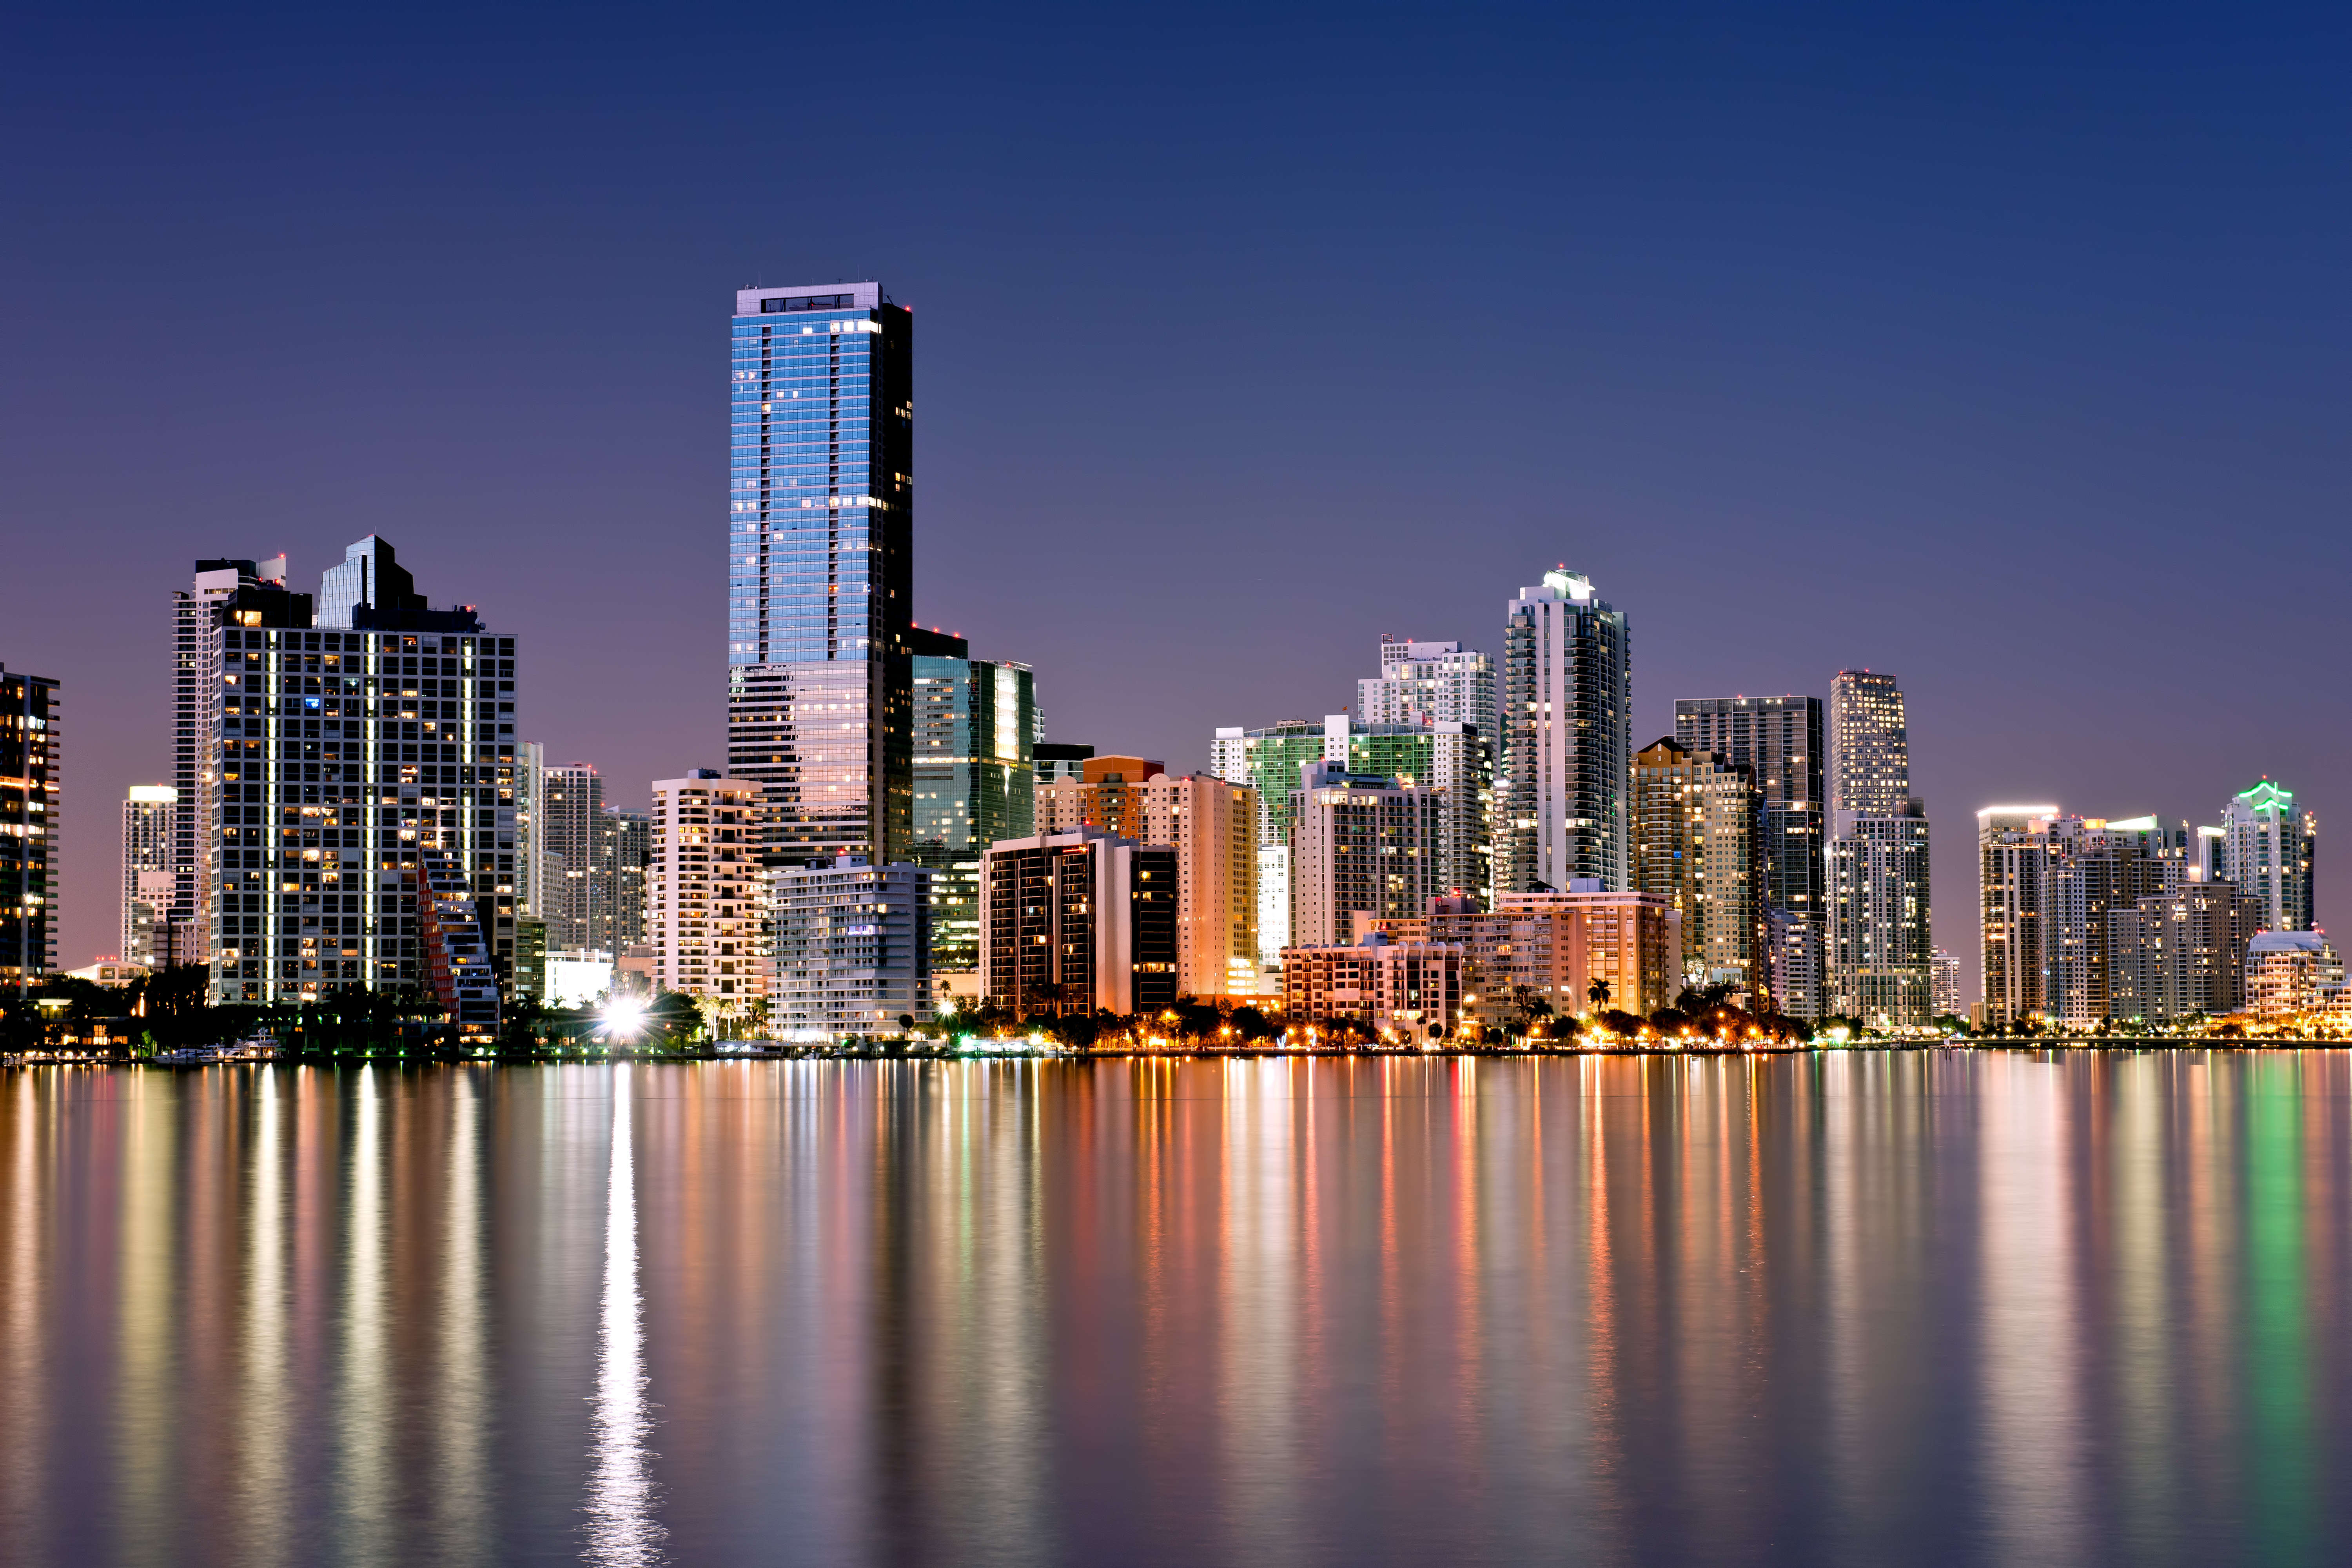 Miami Skyline Exclusive HD Wallpapers 4741 6000x4000